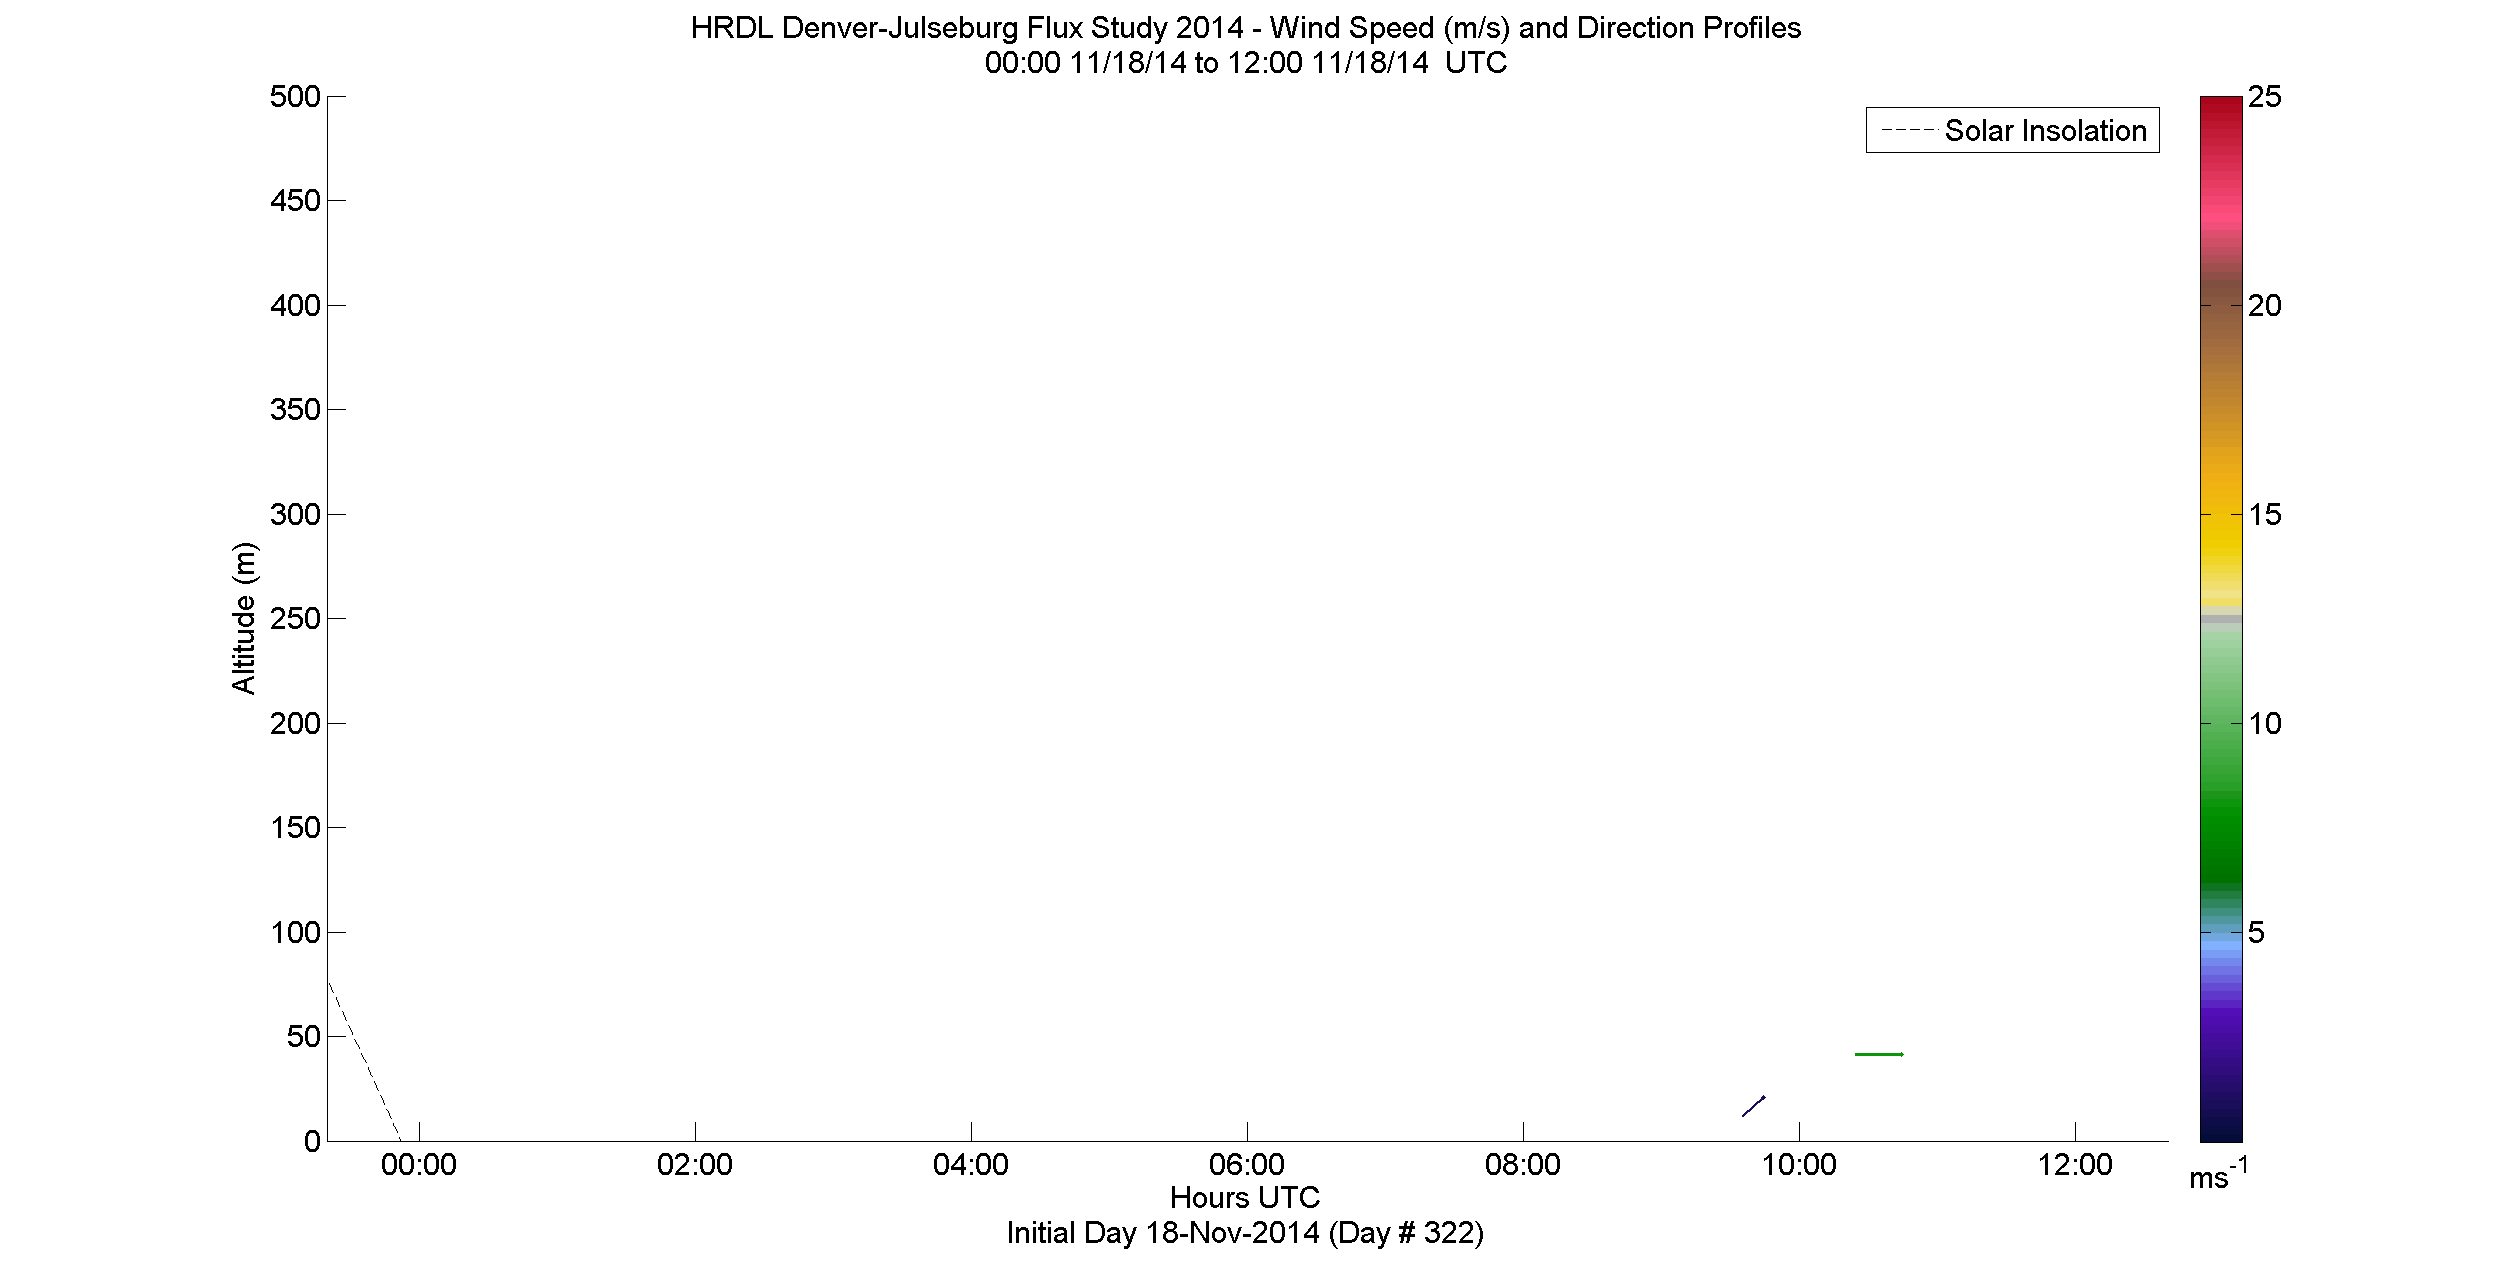 HRDL speed and direction profile - November 18 am